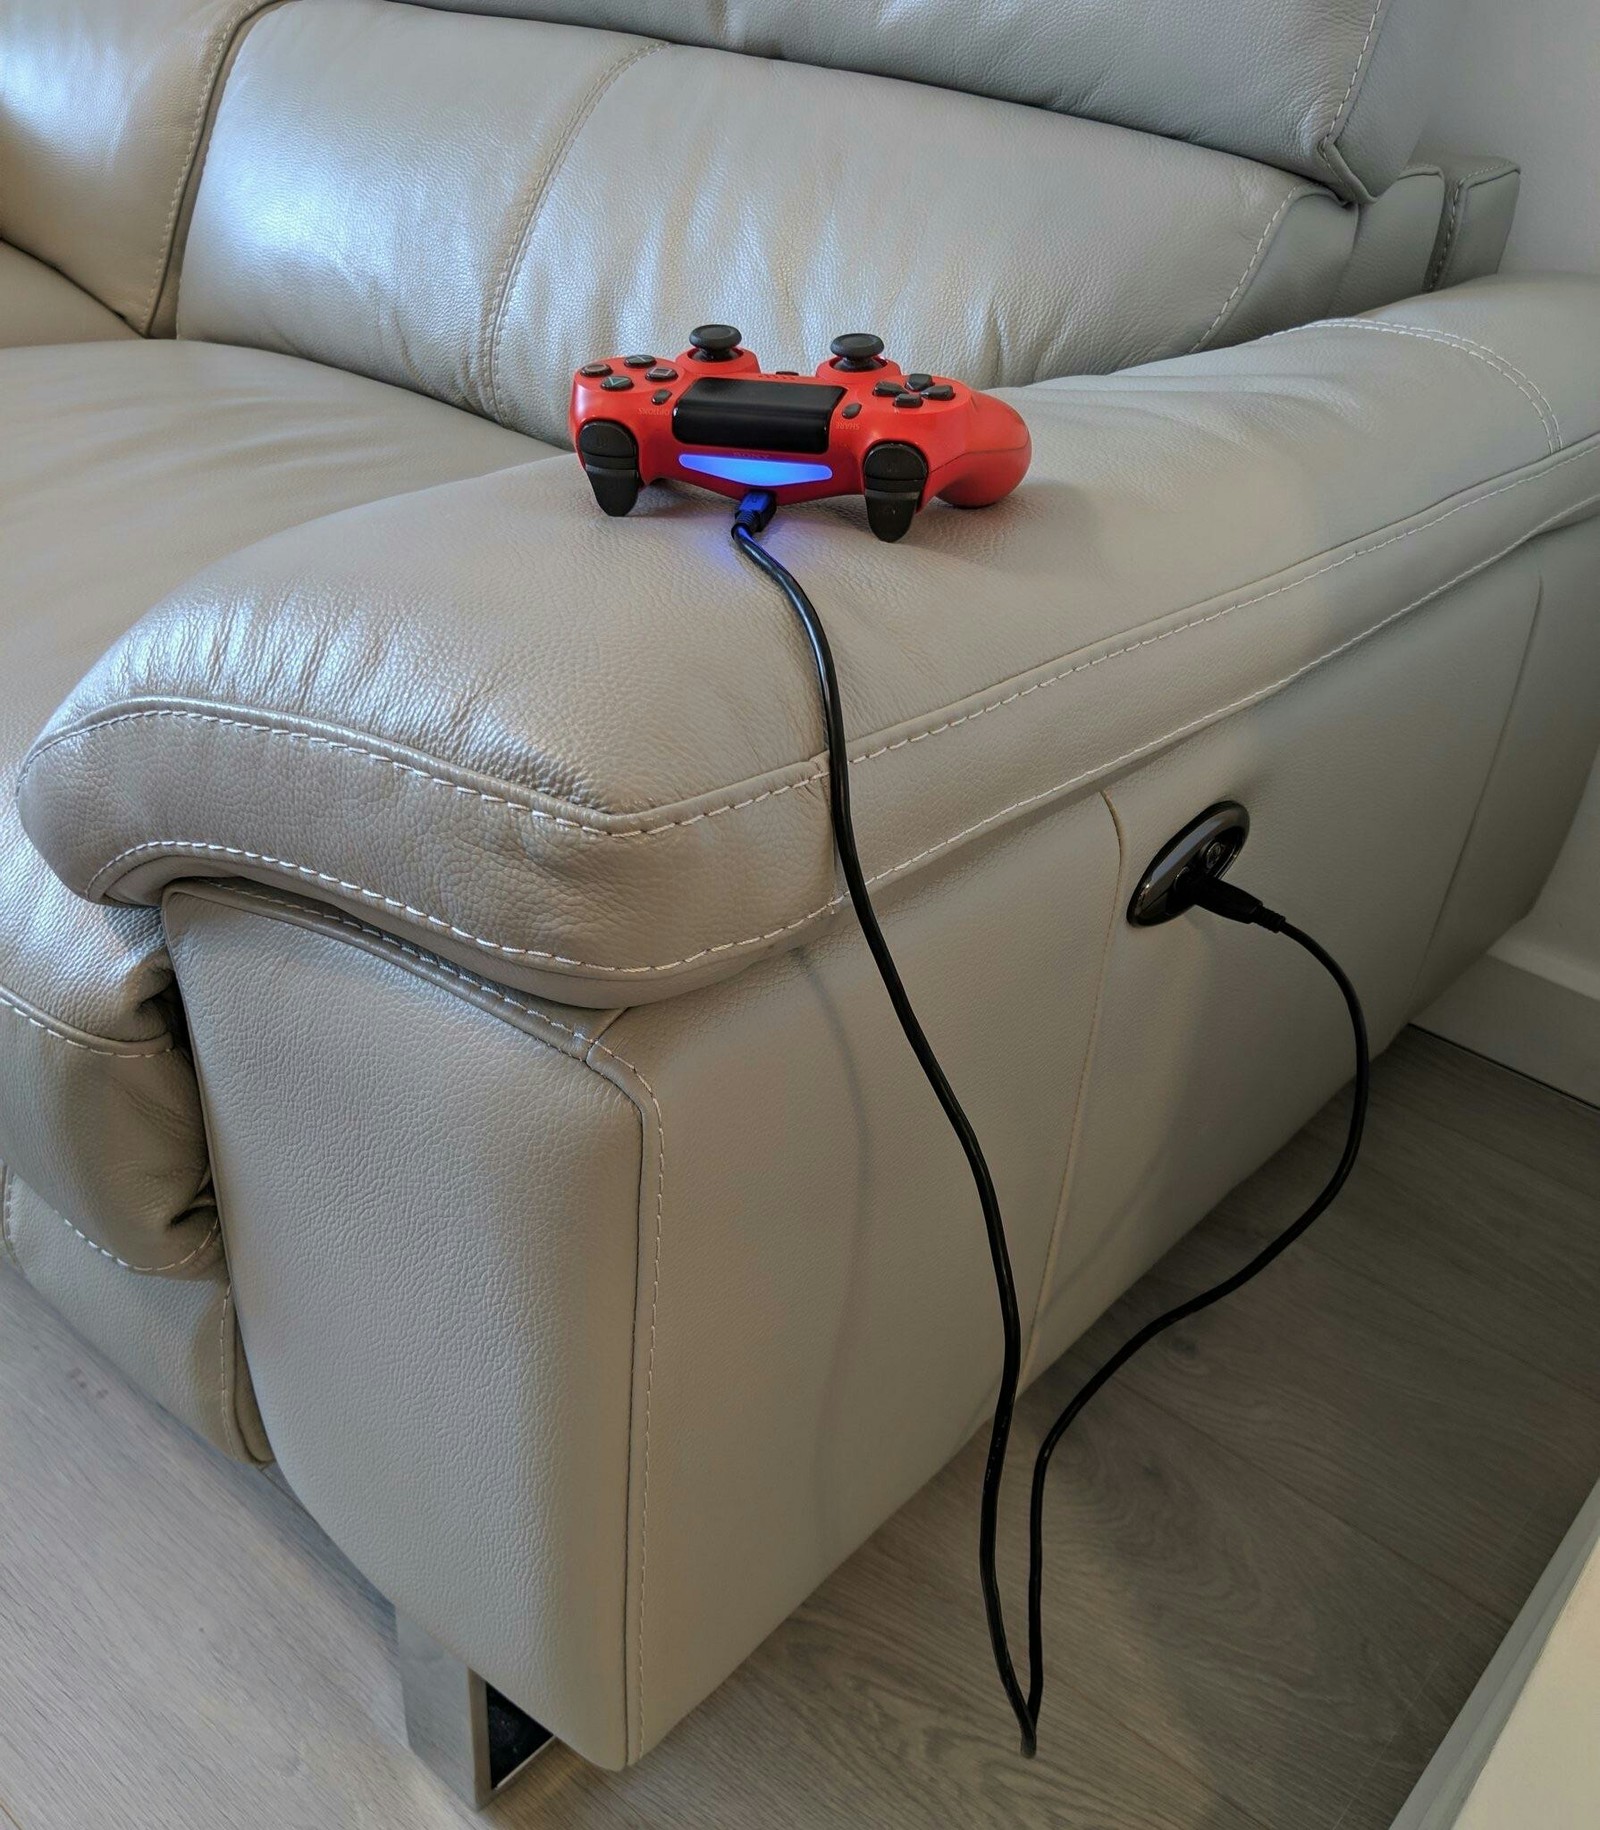 I have to find and buy this sofa. - Sofa, Games, League of Gamers, Gamers, The photo, Convenience